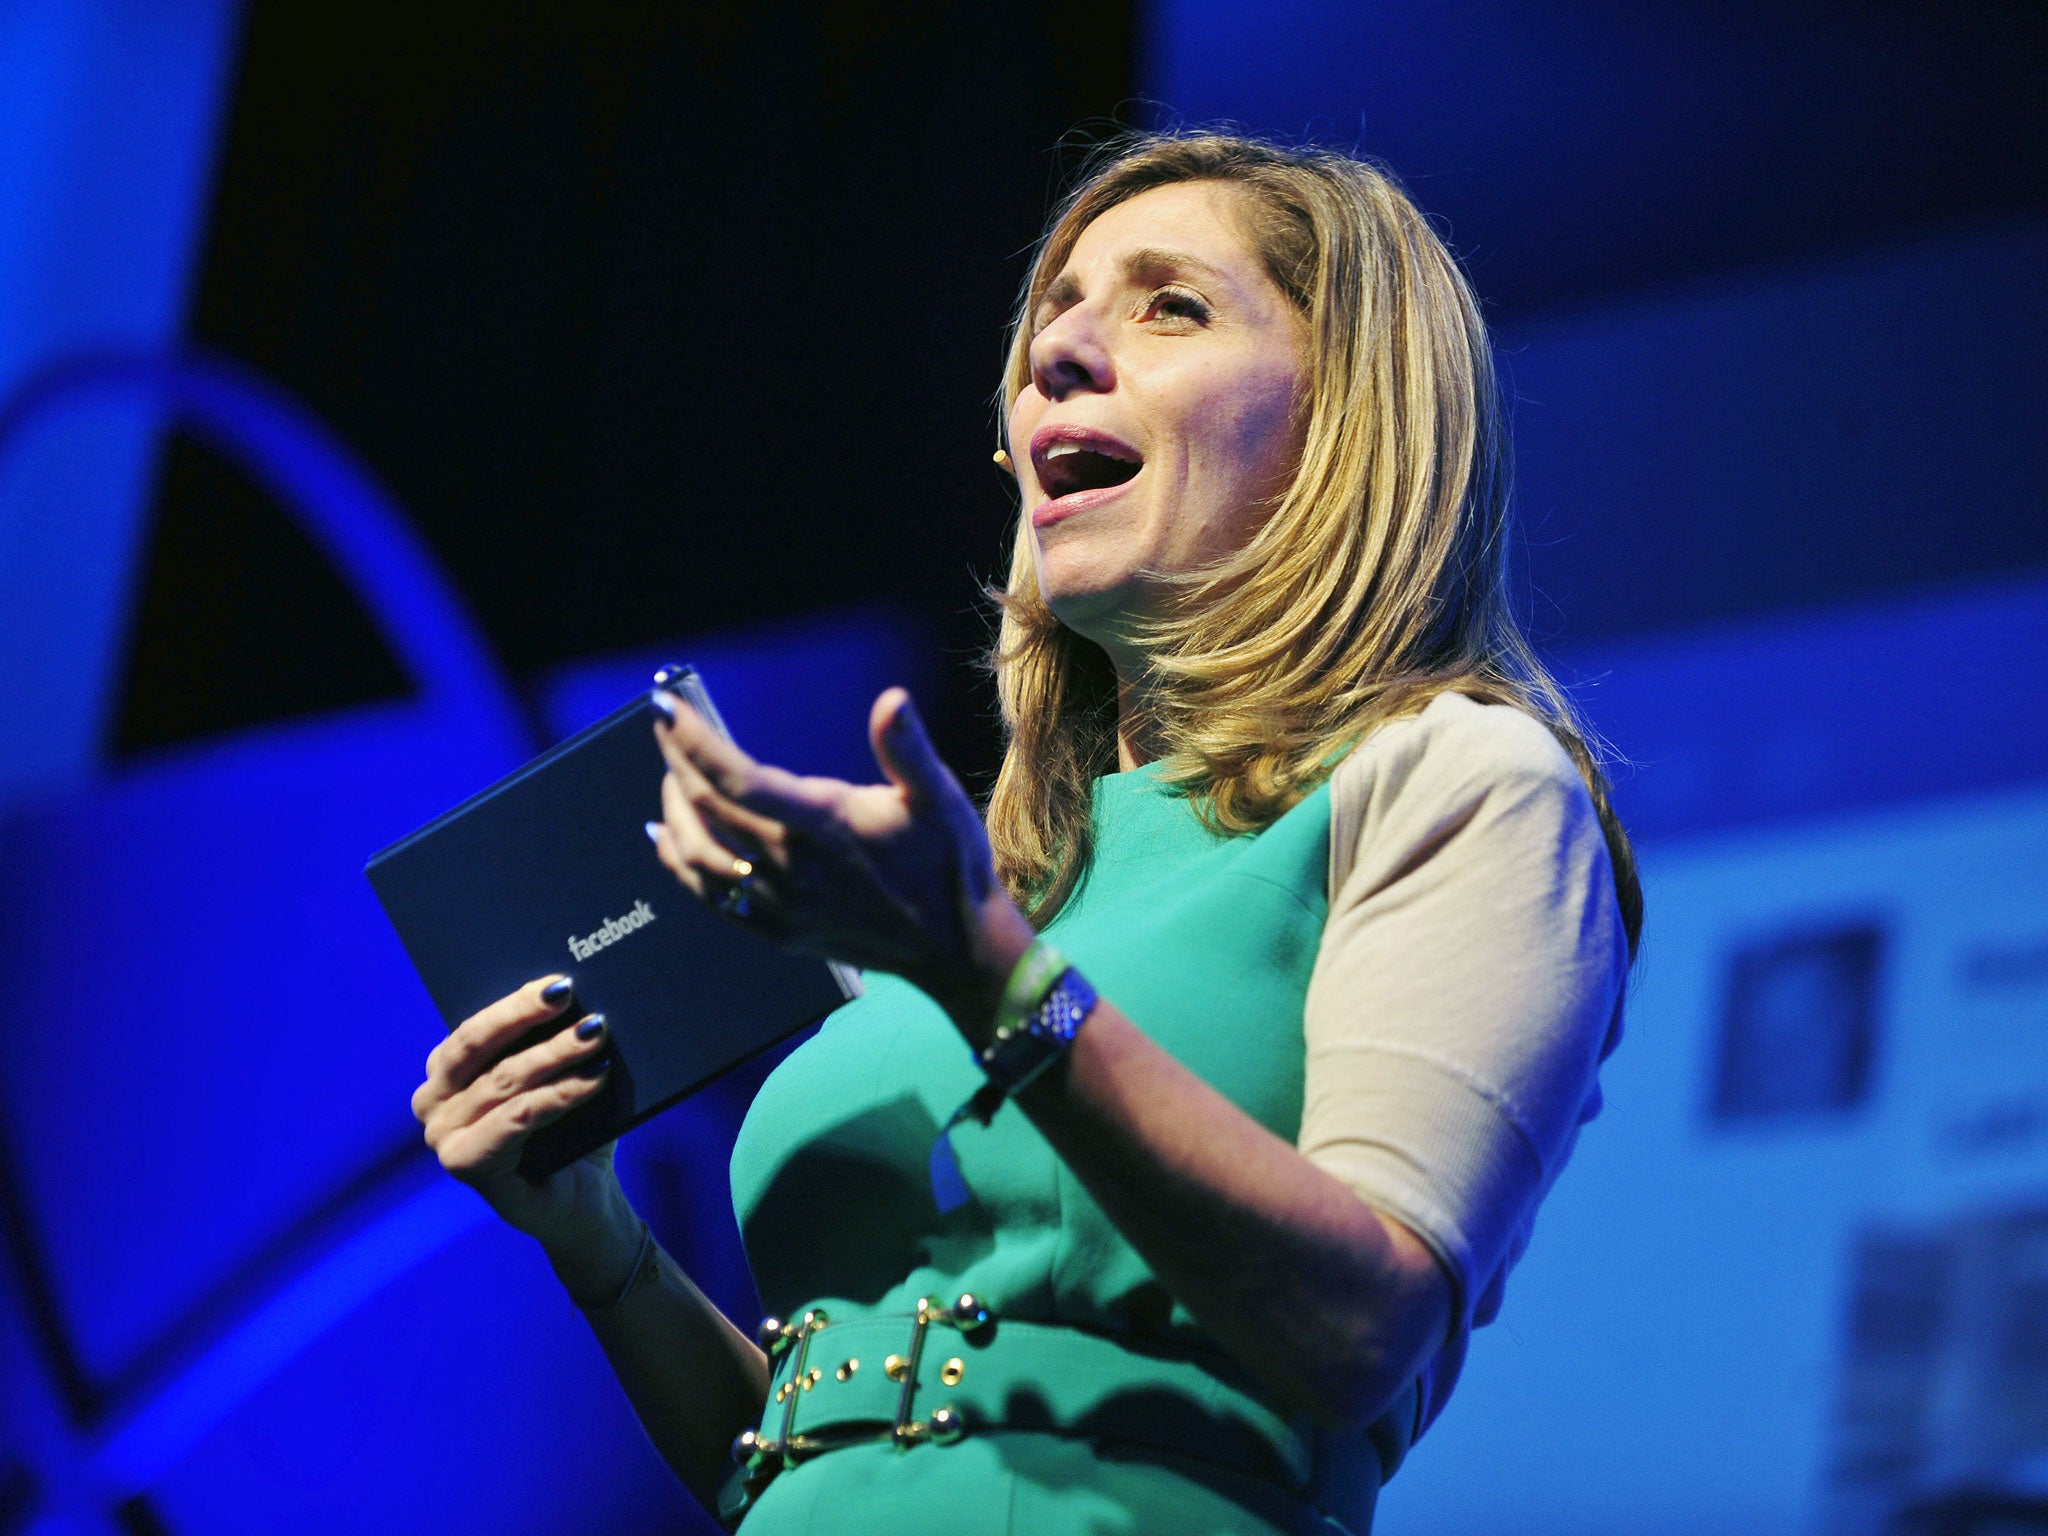 Nicola Mendelsohn, VP EMEA at Facebook, says the company wants to to help more women turn their ideas into businesses